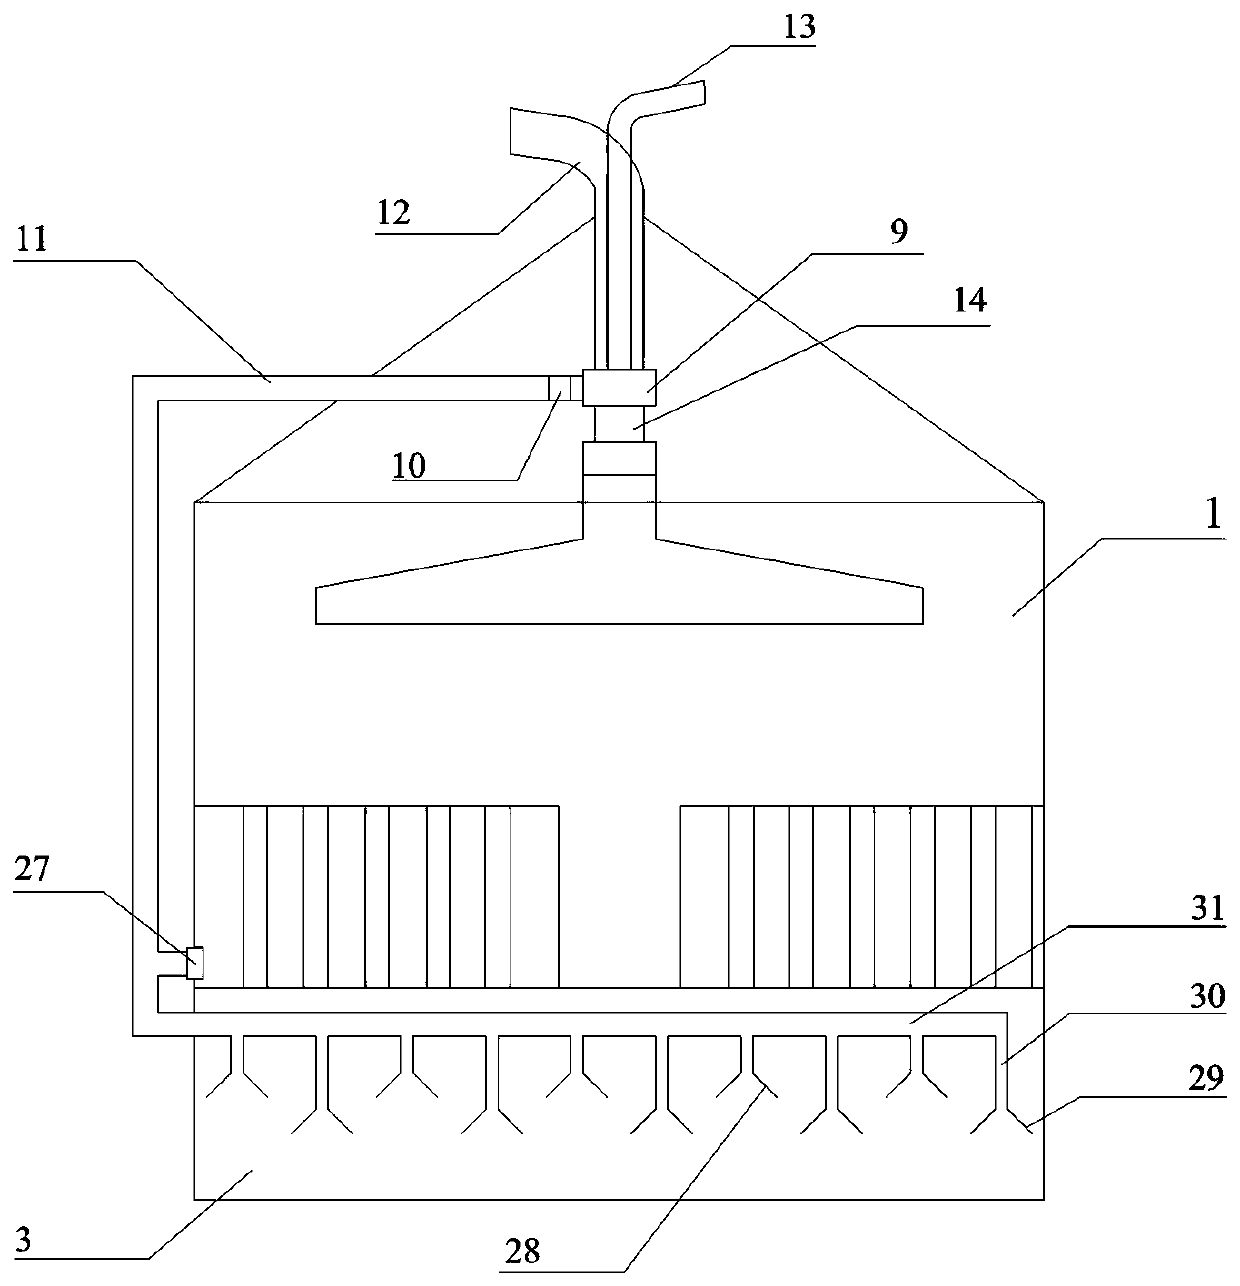 A heating system capable of deodorizing pig houses